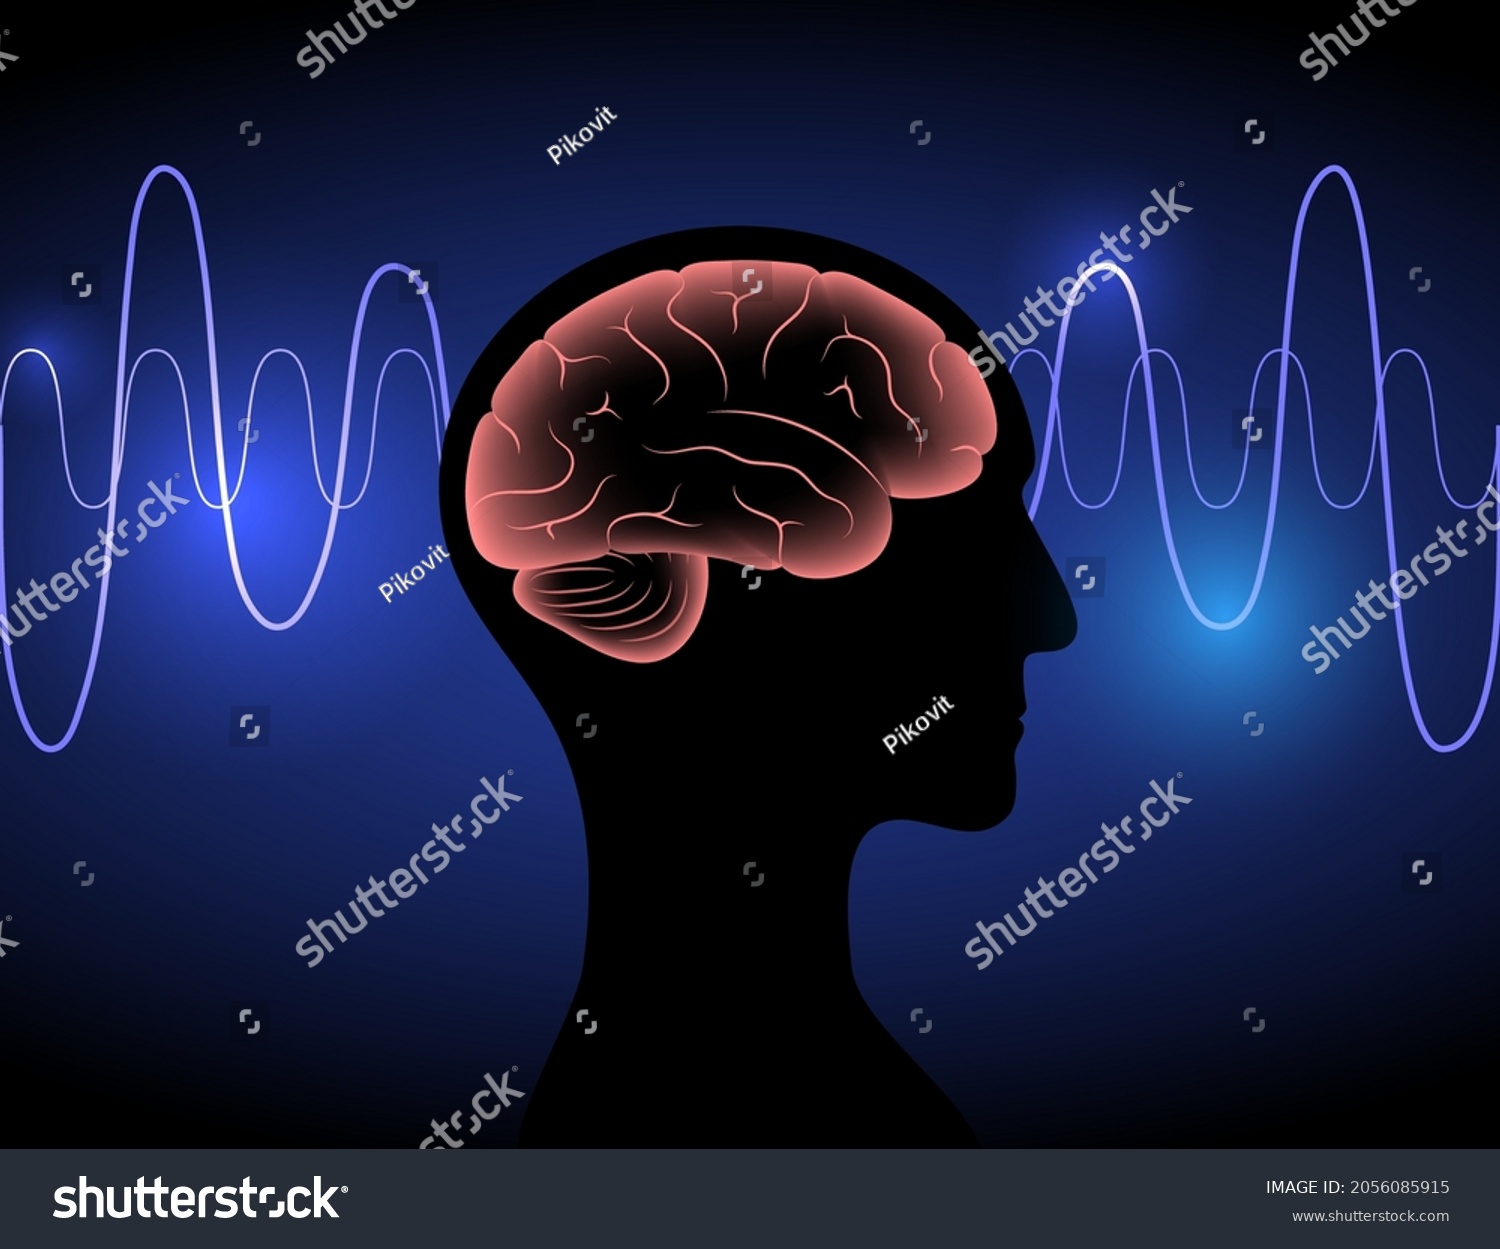 SVG of Brain wave on abstract background. Neural network concept. Limbic system and human brain anatomy. Digital science technology concept. Cerebral cortex and cerebrum medical poster 3D vector illustration svg